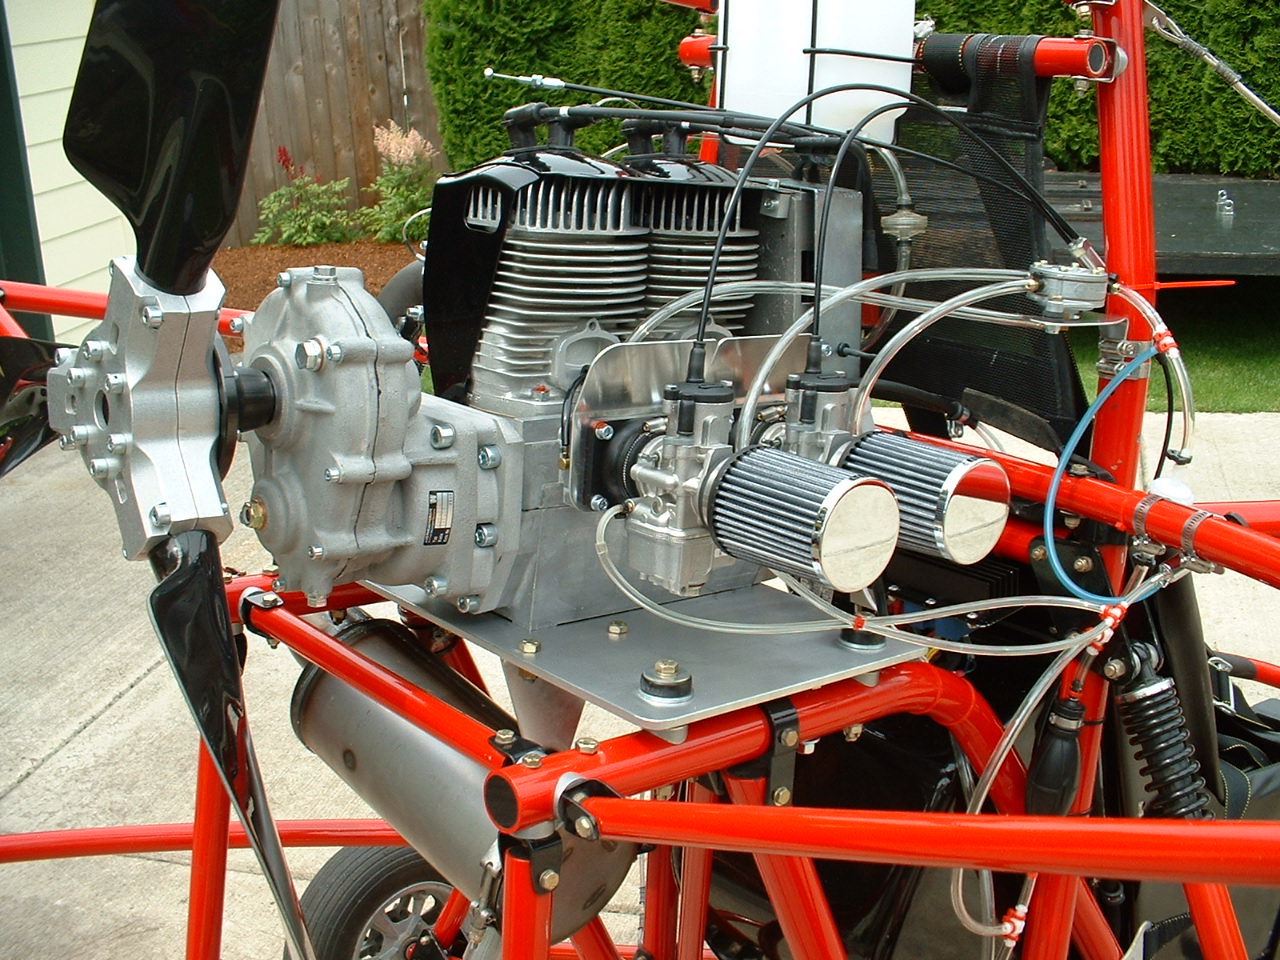 Large Engine and Red Frame